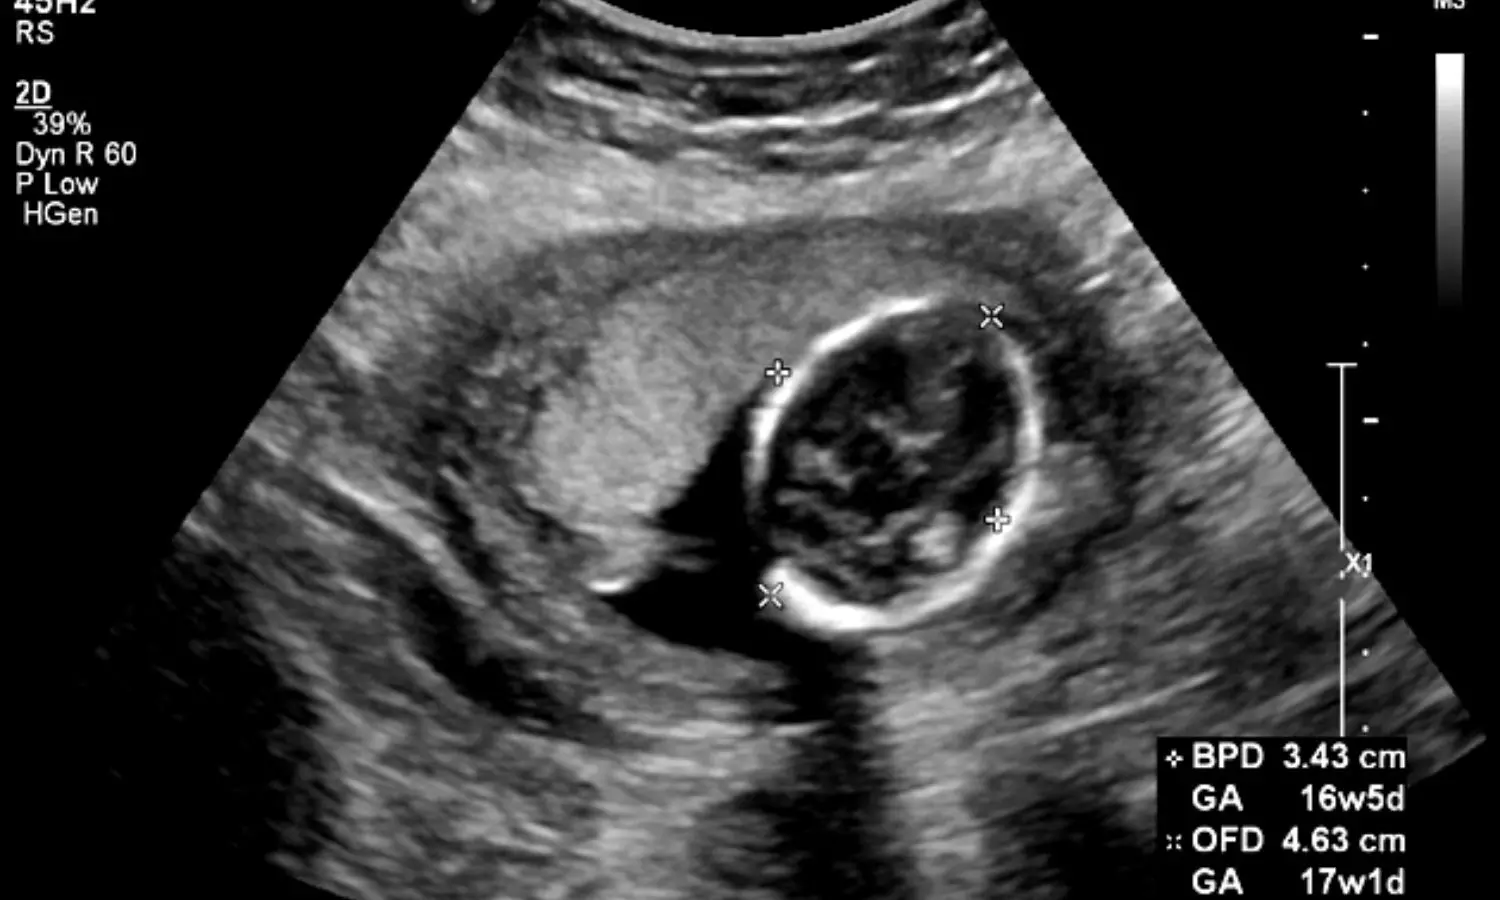 AI-based analysis of ultrasound images and videos predicts gestational age more accurately: Study